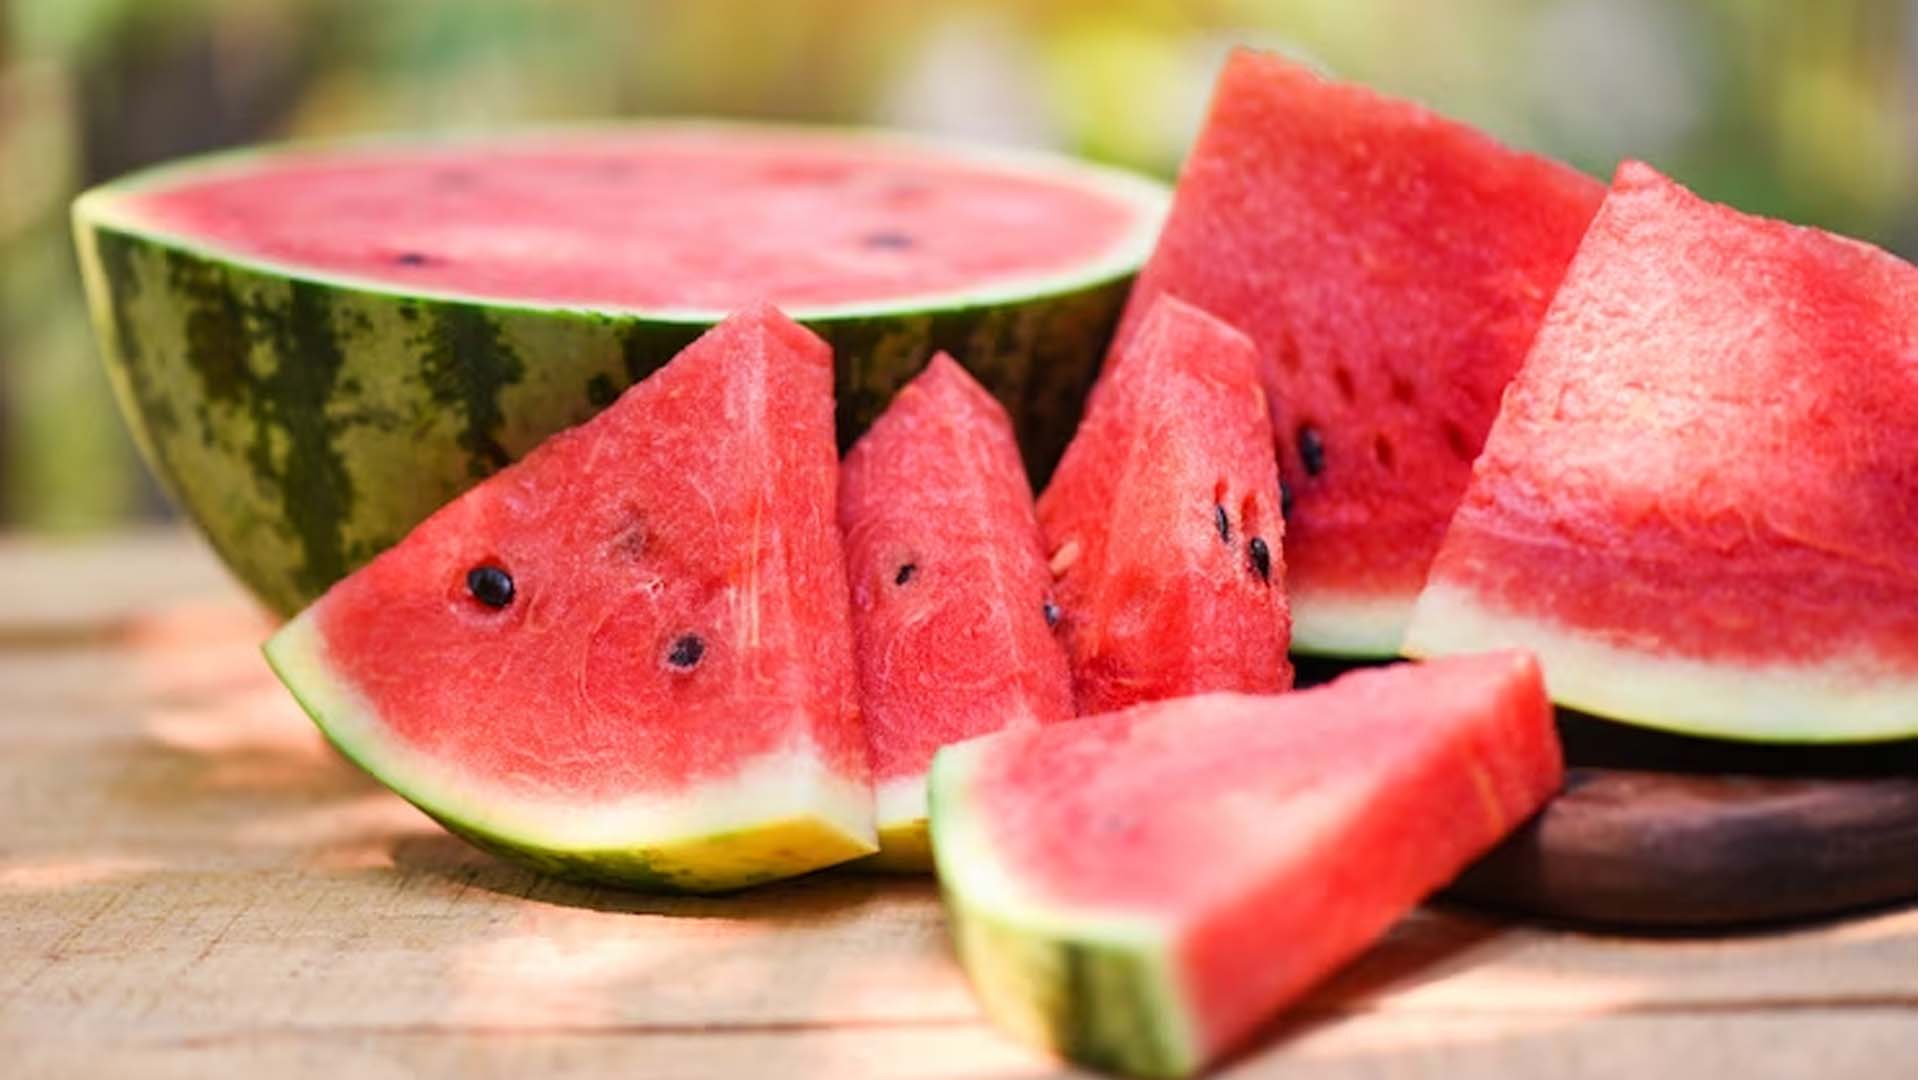 What are the Nutritional Benefits of Watermelon?